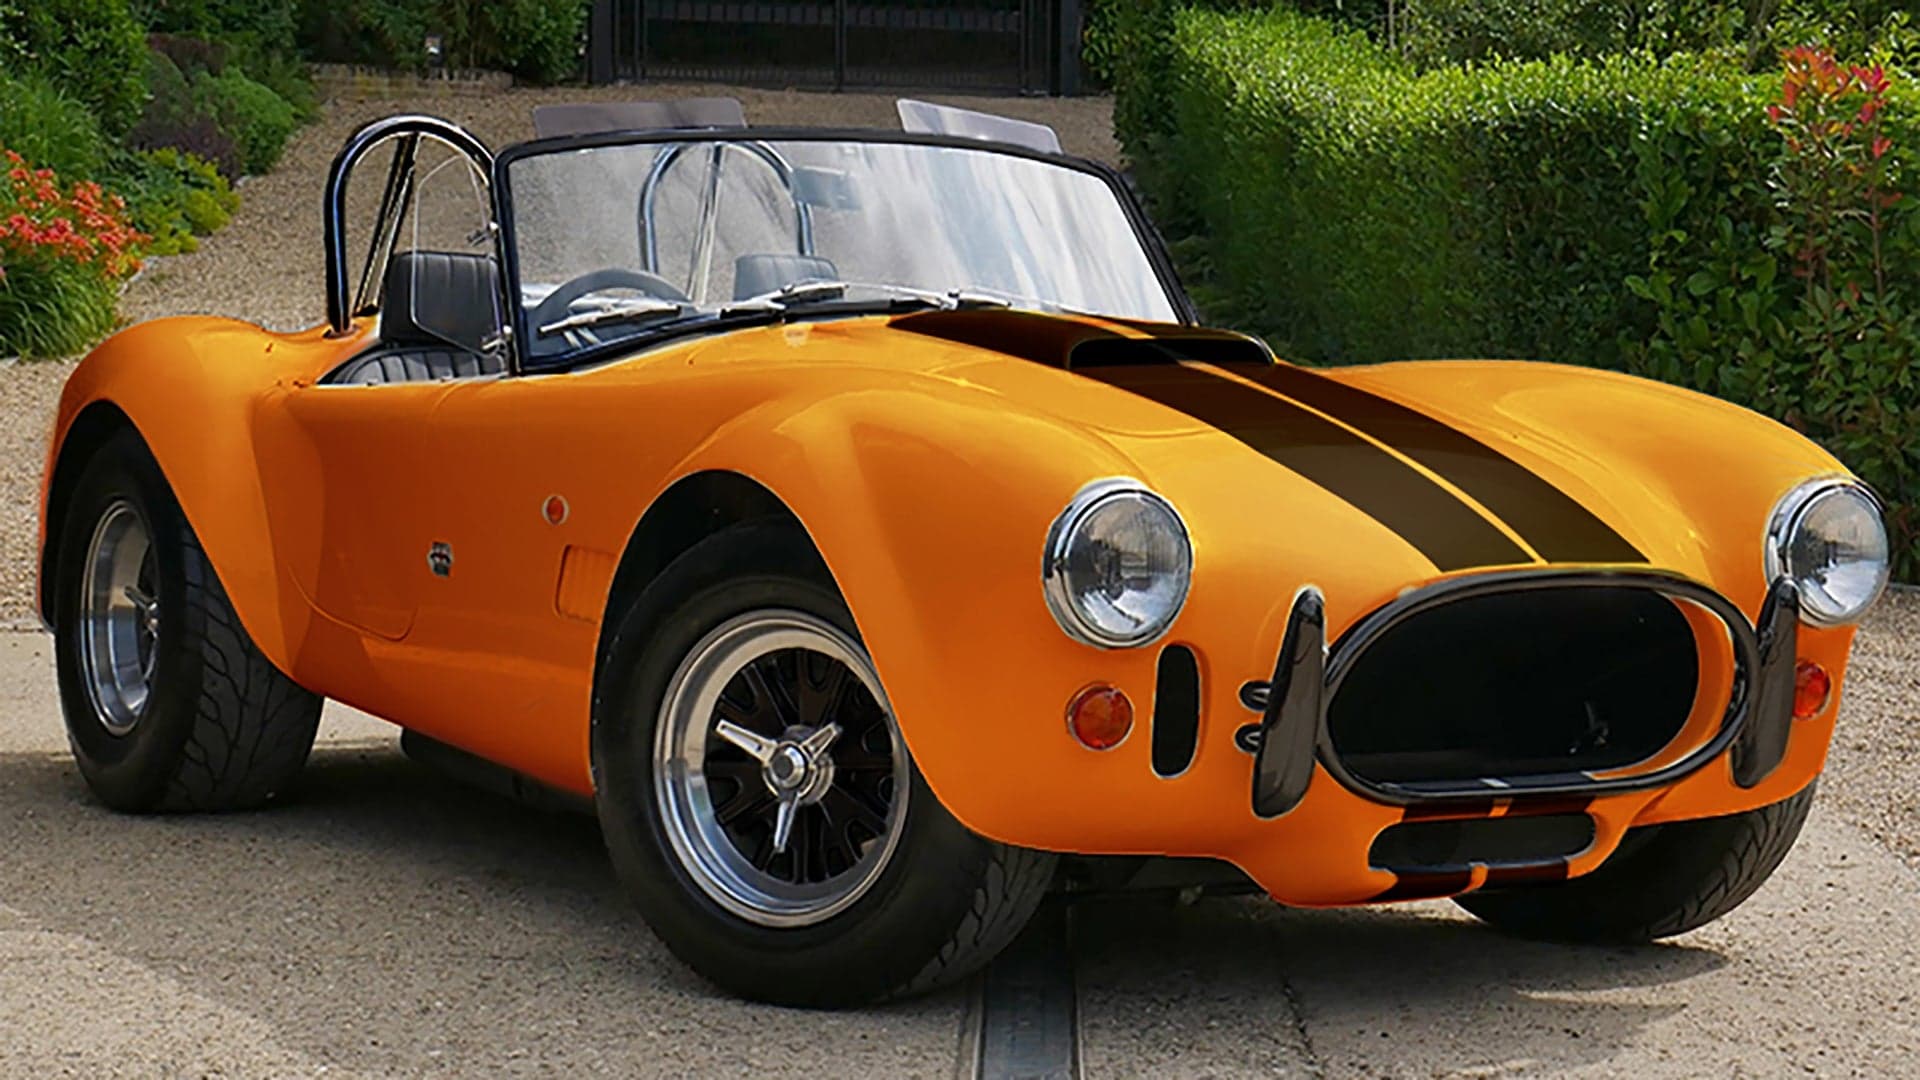 New Electric AC Cobra Offers 616 HP and 737 LB-FT of Torque at $220,000